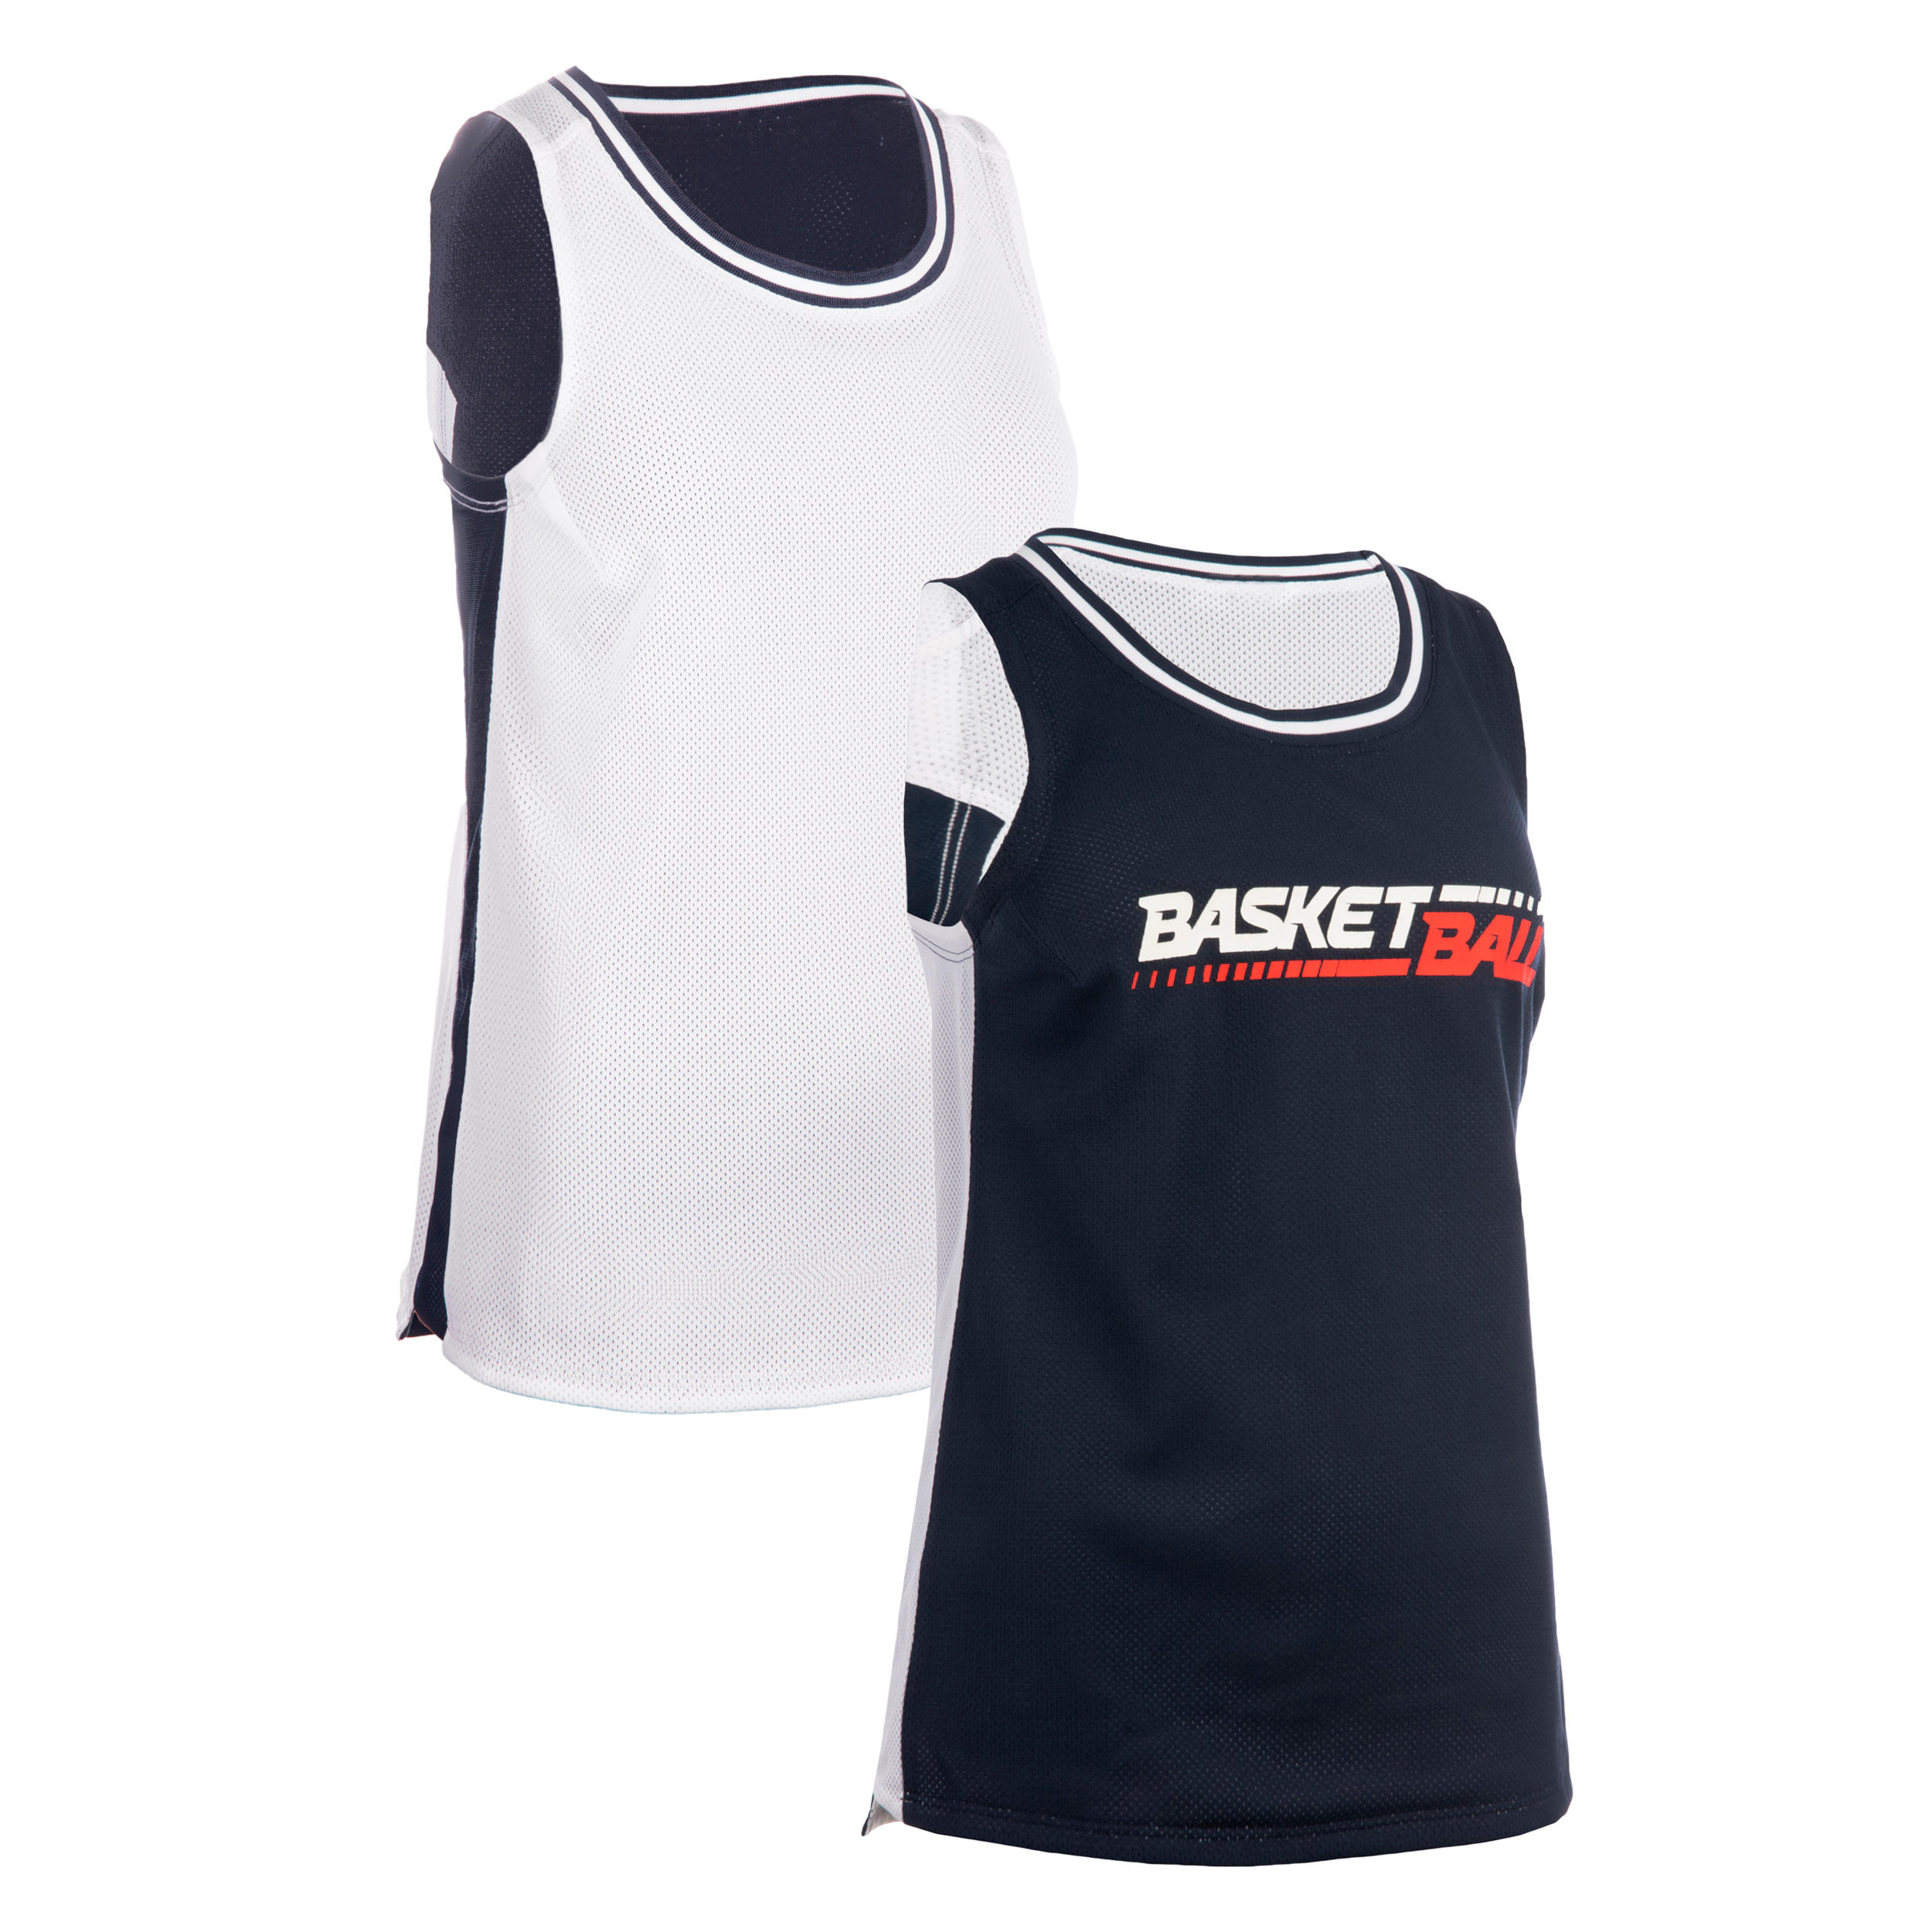 basketball jersey online india